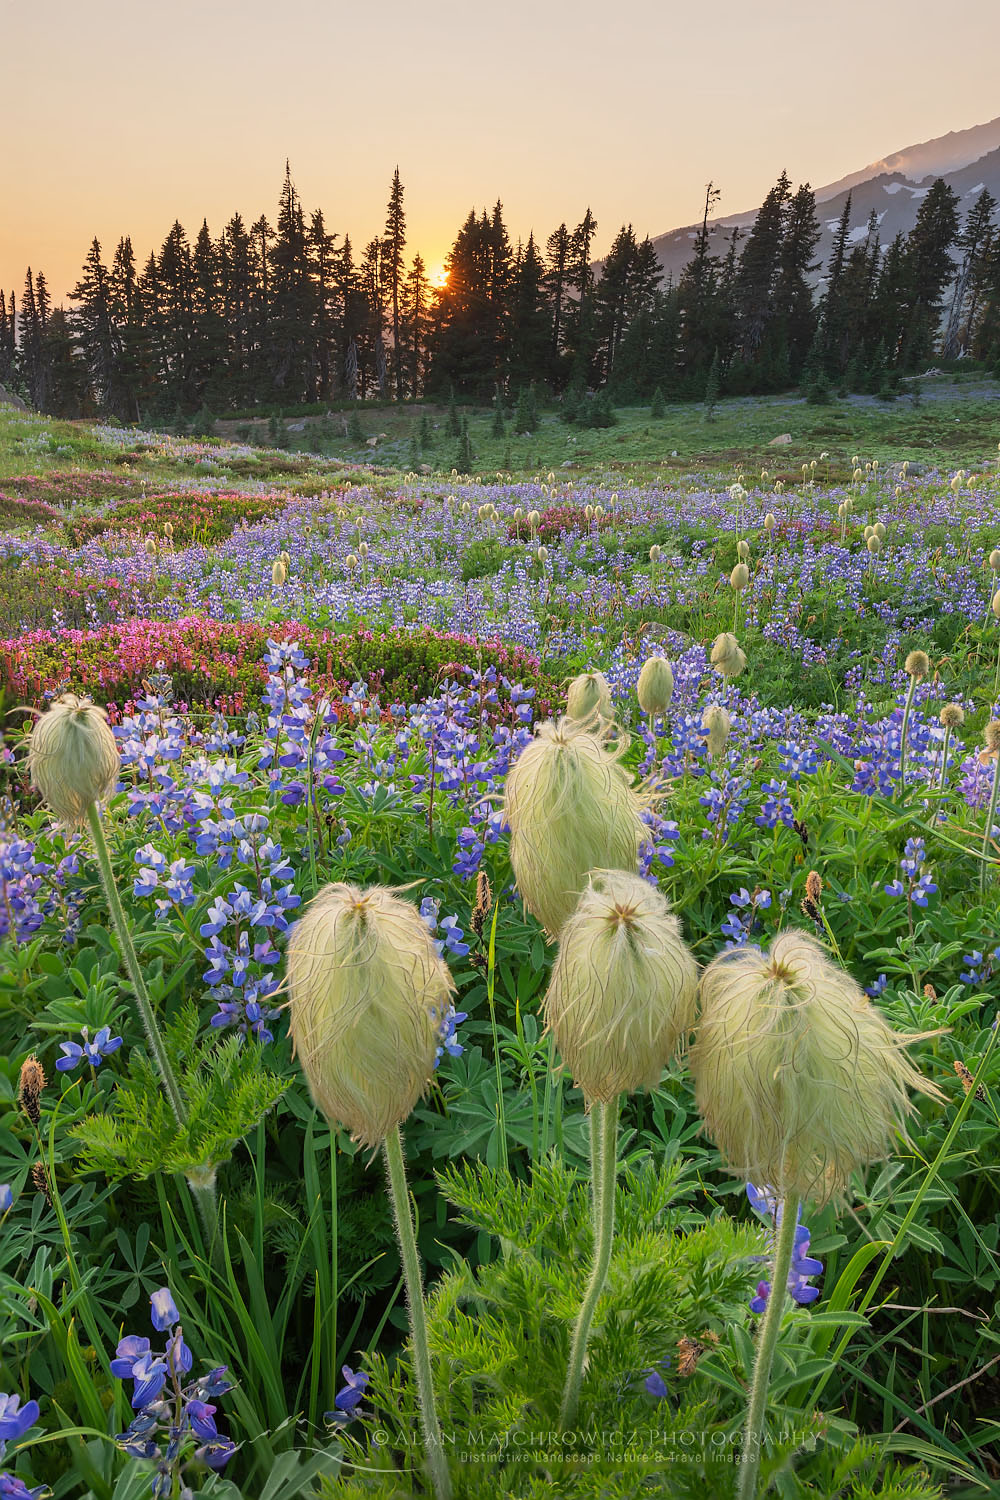 Sunset over Mount Rainier Paradise wildflower meadows. Containing a mixture of Western Anemone, Broadleaf Lupines, Pink Mountain Heather, and American Bistort. Mount Rainier National Park, Washington #73315